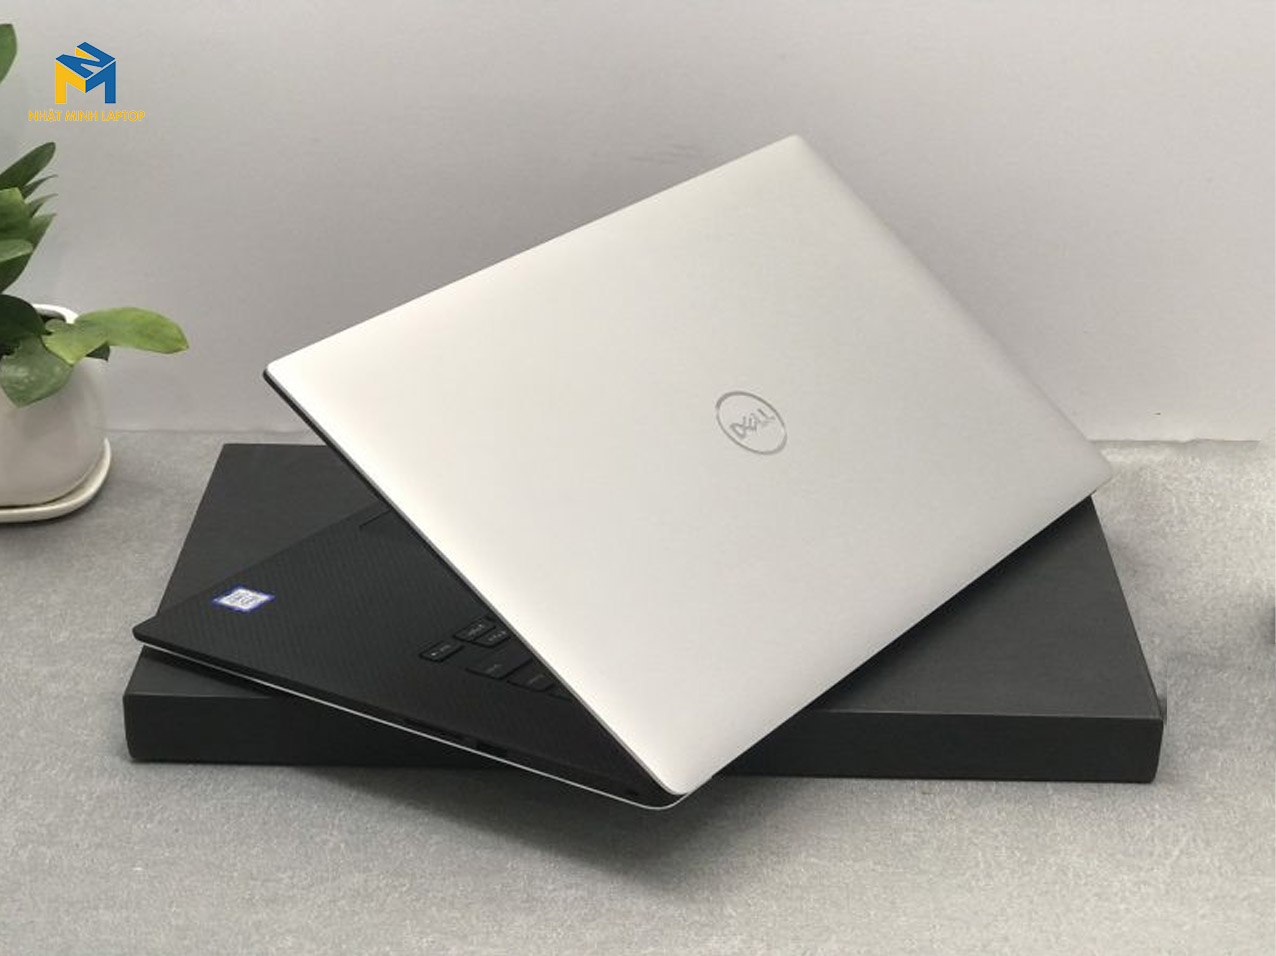 dell xps 15 7590 cũ